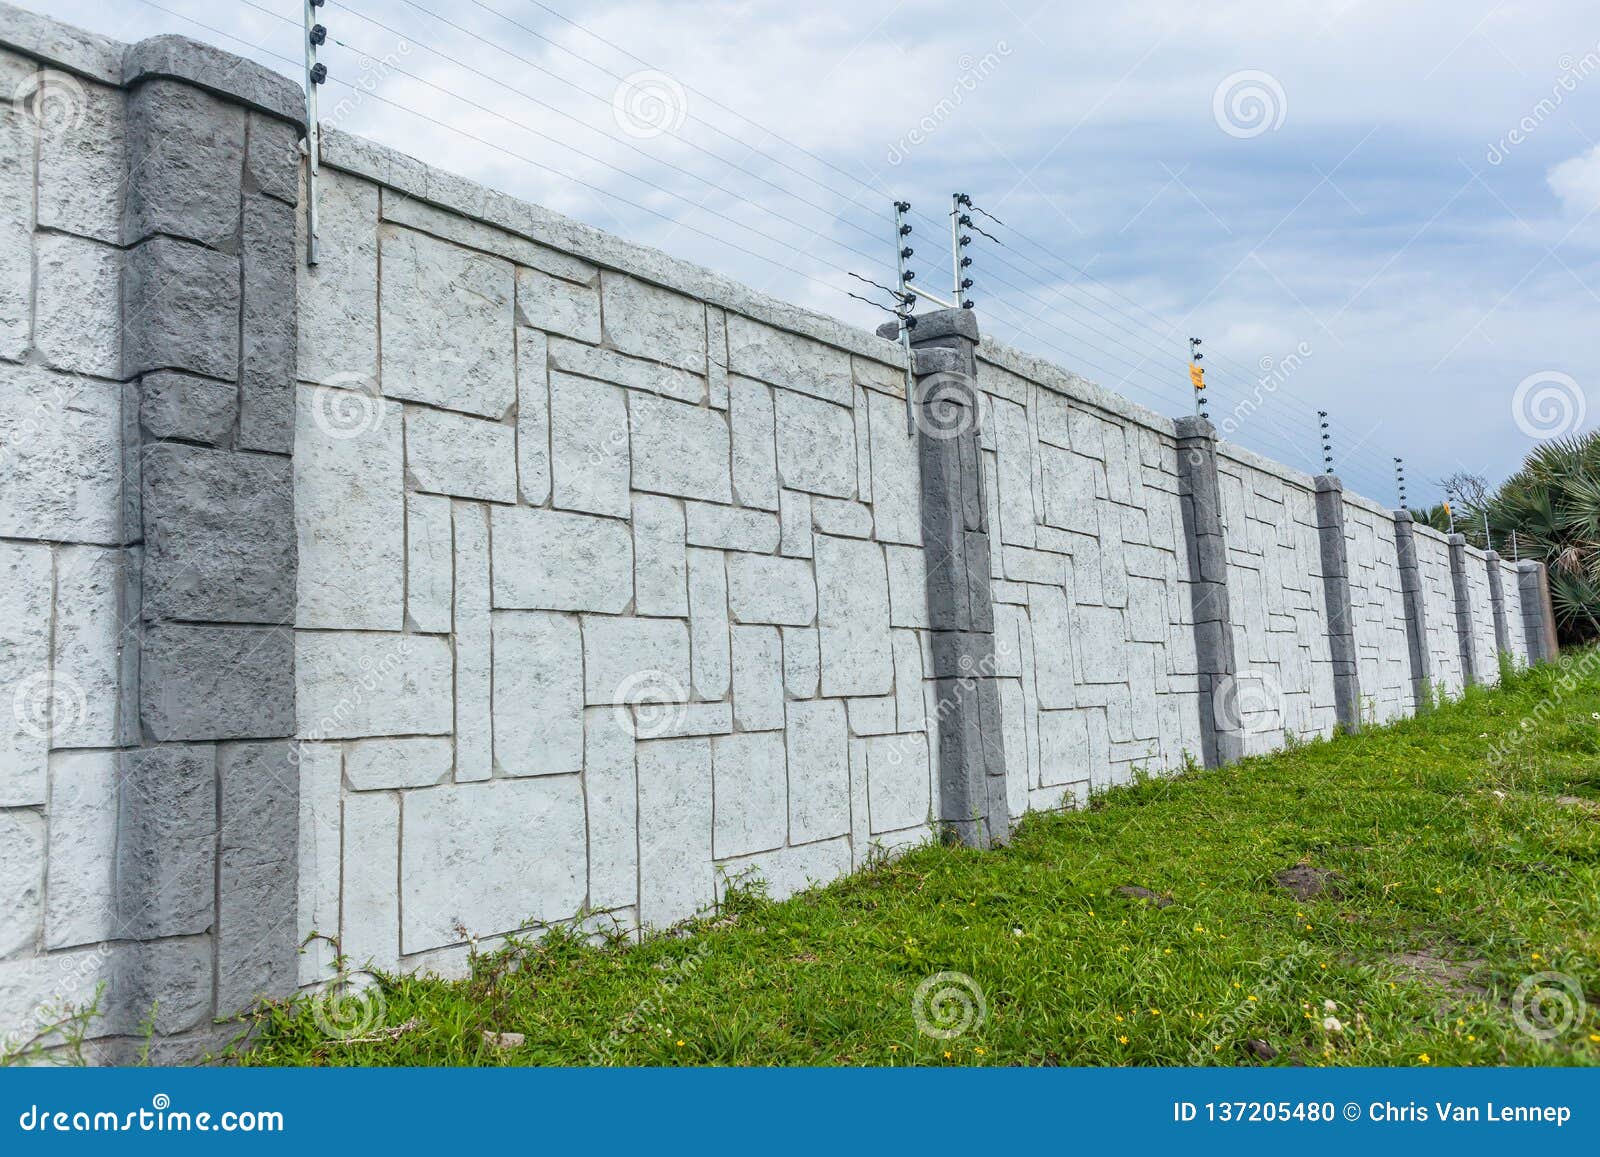 Boundary Wall Gray Electricfied Wires Stock Photo - Image of ...